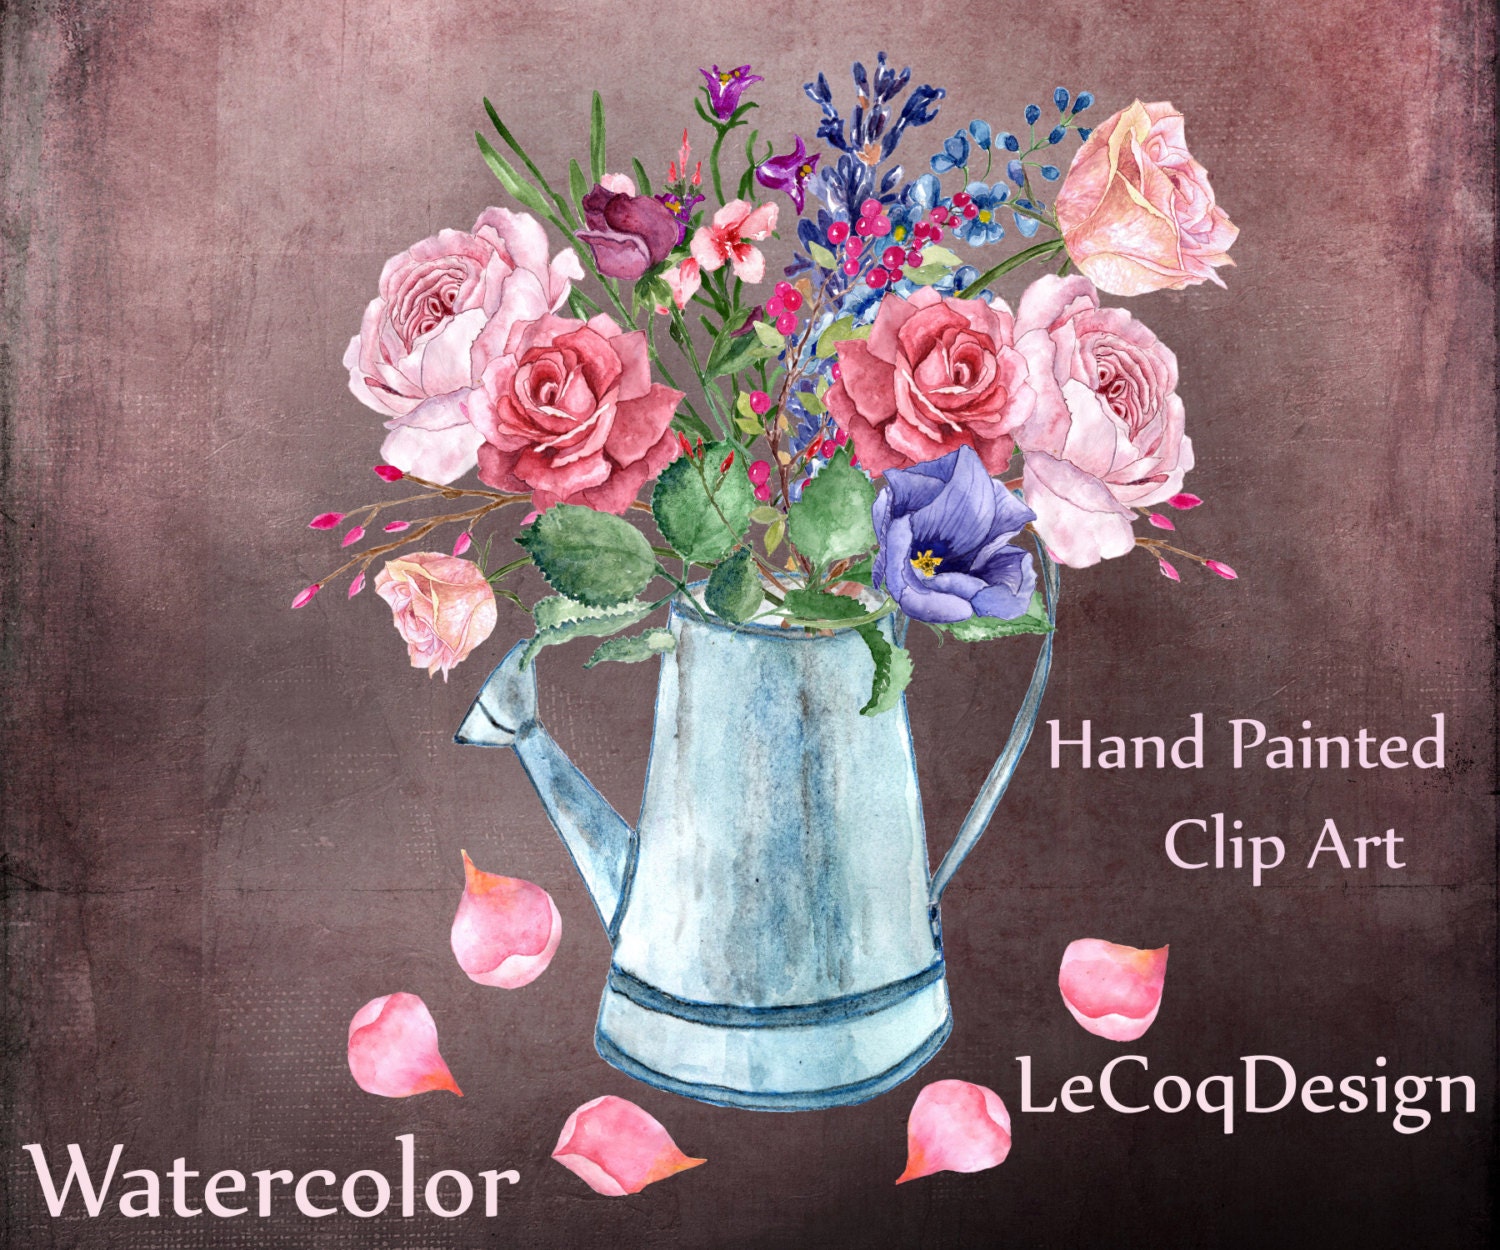 Watercolor roses clipart: FOWERS CLIPART wedding